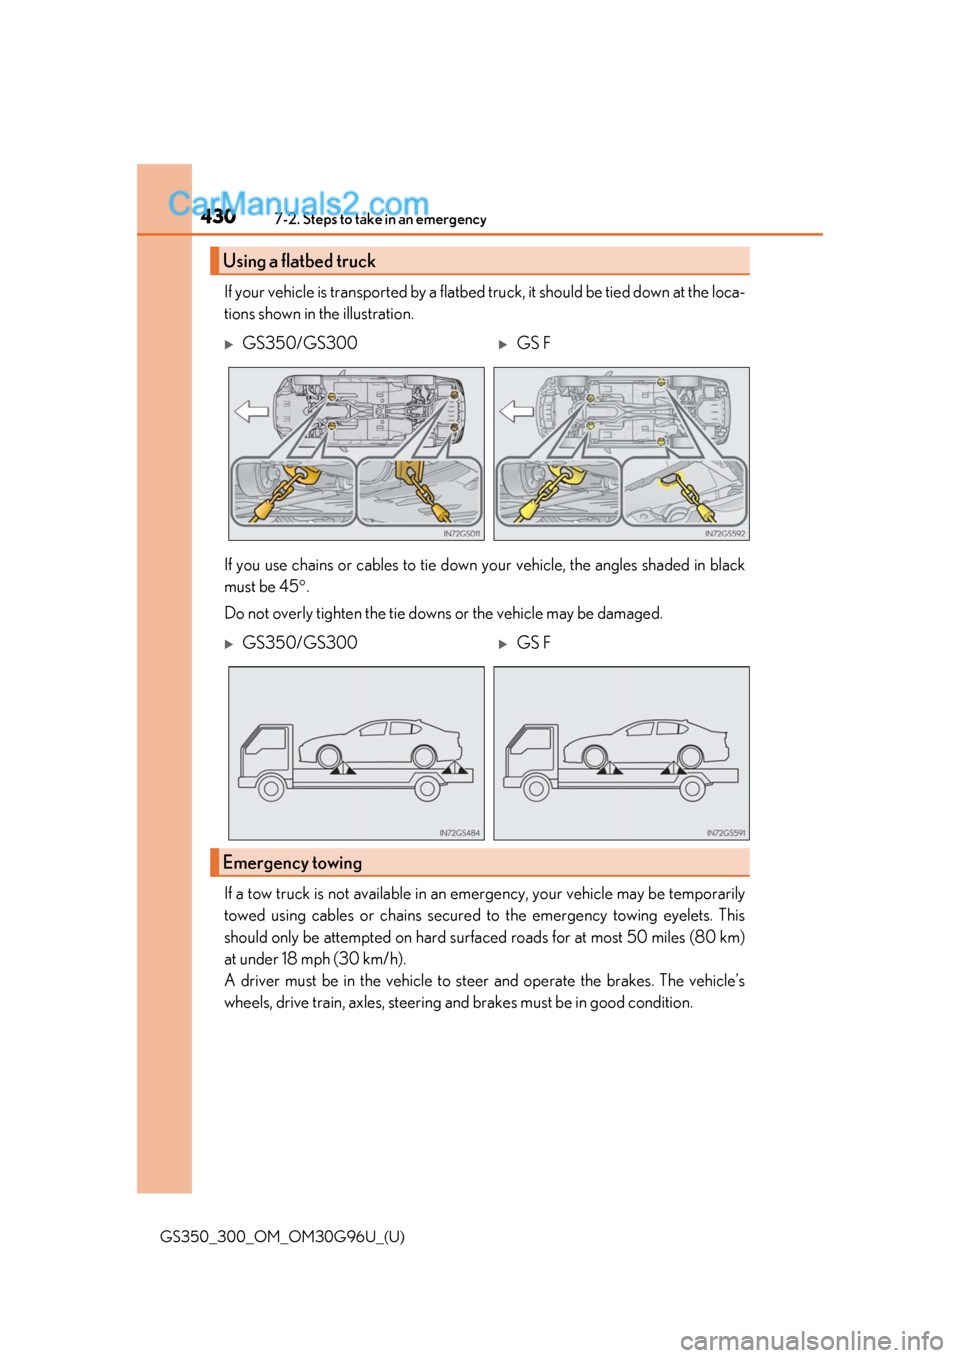 Lexus GS300 2019 User Guide 4307-2. Steps to take in an emergency
GS350_300_OM_OM30G96U_(U)
If your vehicle is transported by a flatbed truck, it should be tied down at the loca-
tions shown in the illustration.
If you use chain